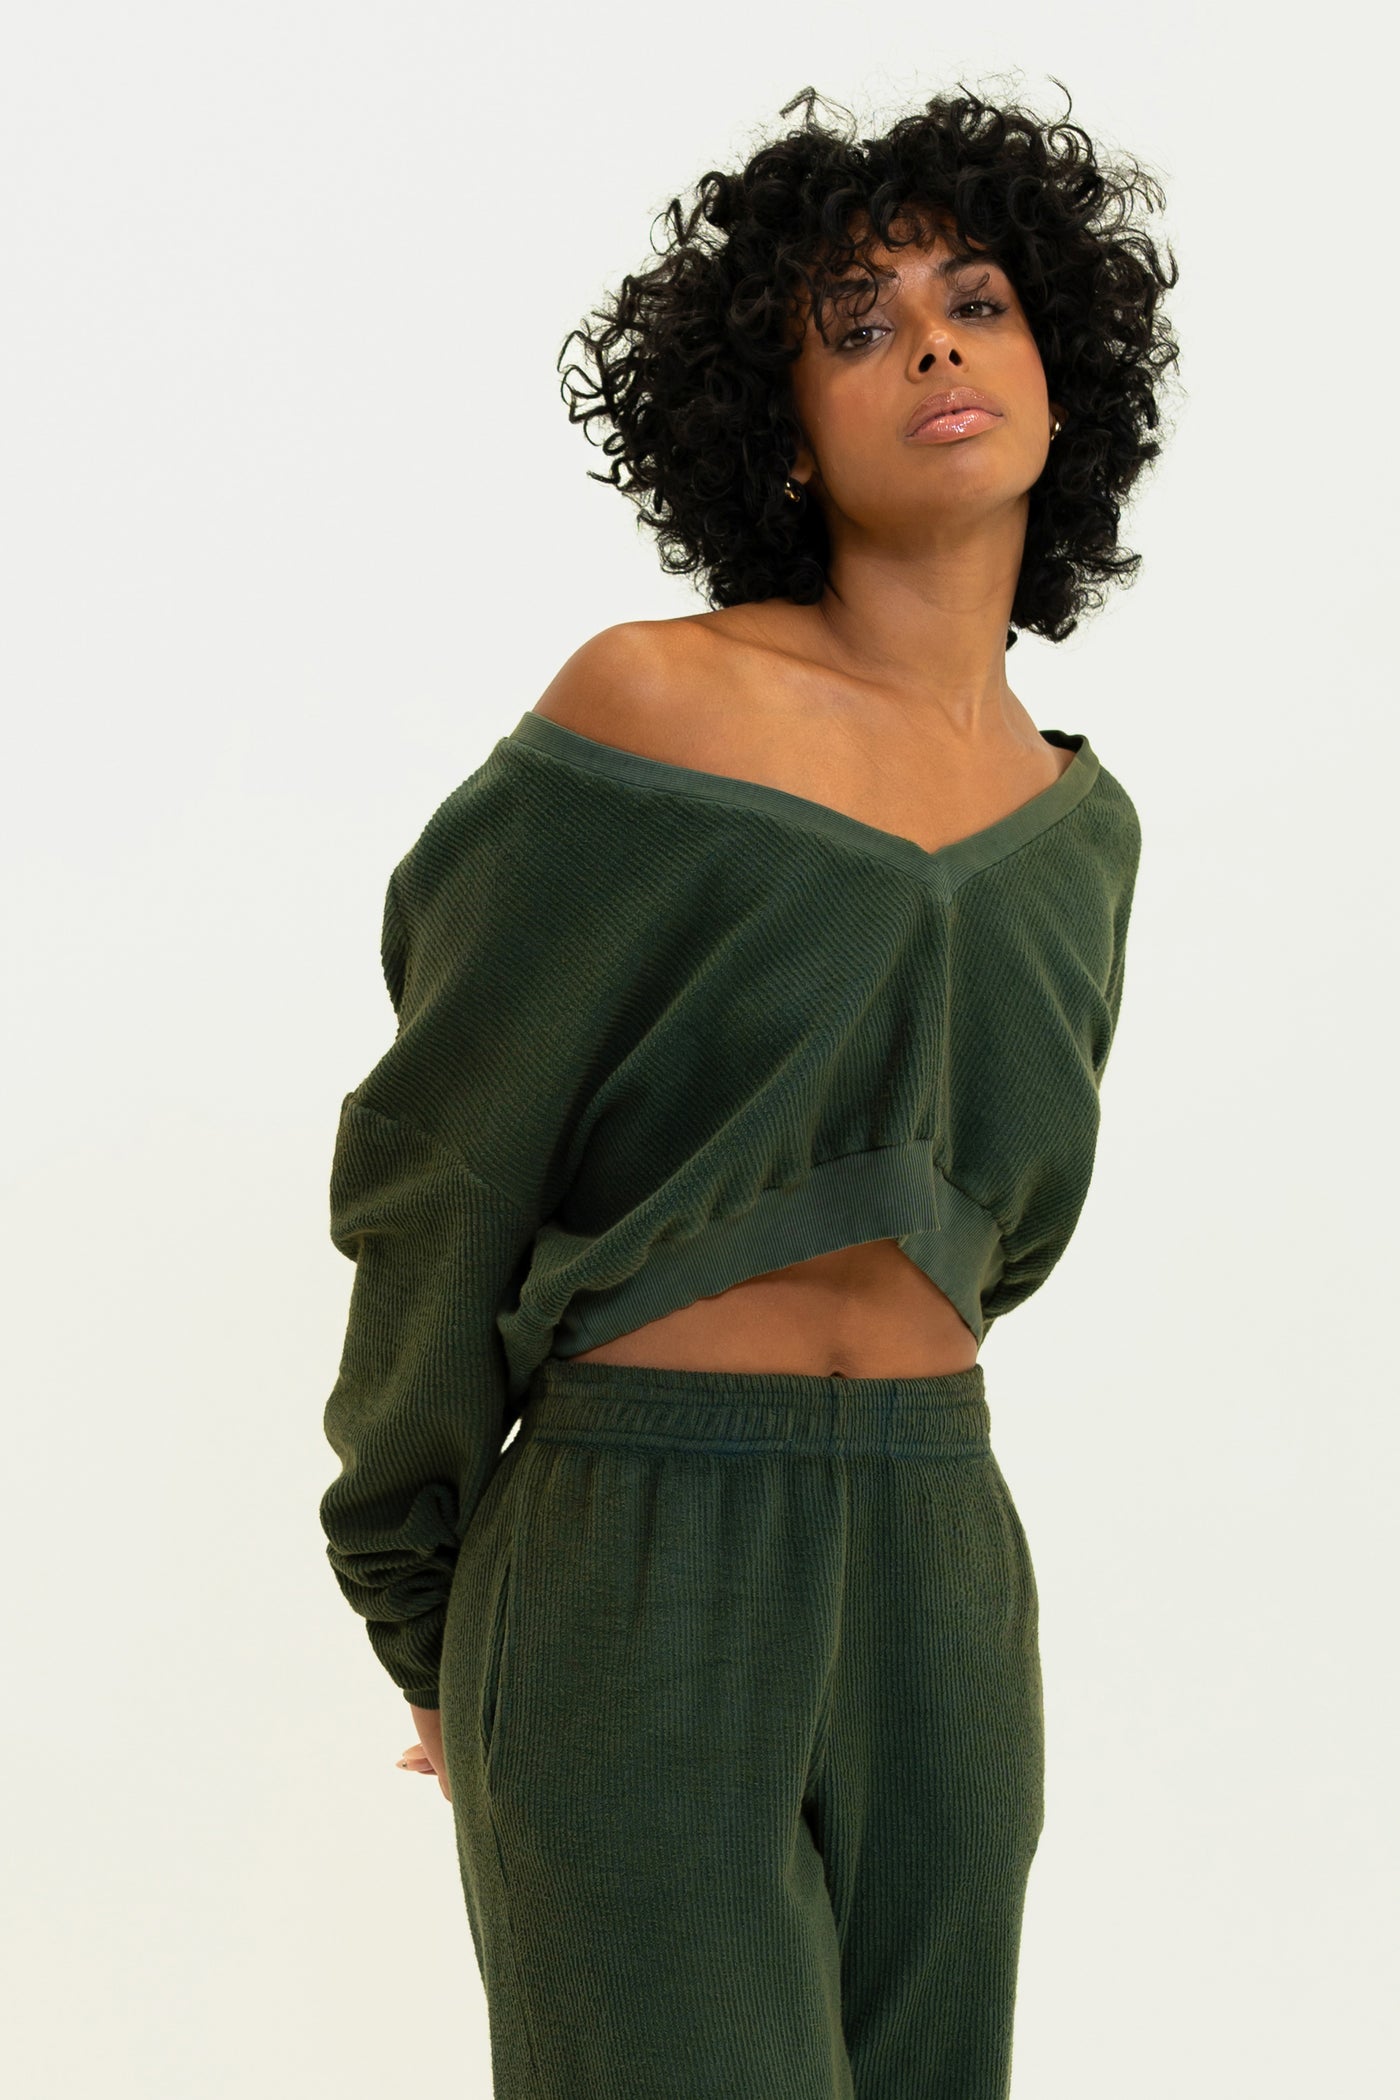 Olive Aspen Pullover featuring a sensual deep V-neck, made from breathable, soft corded terry fabric for a distinctive look.